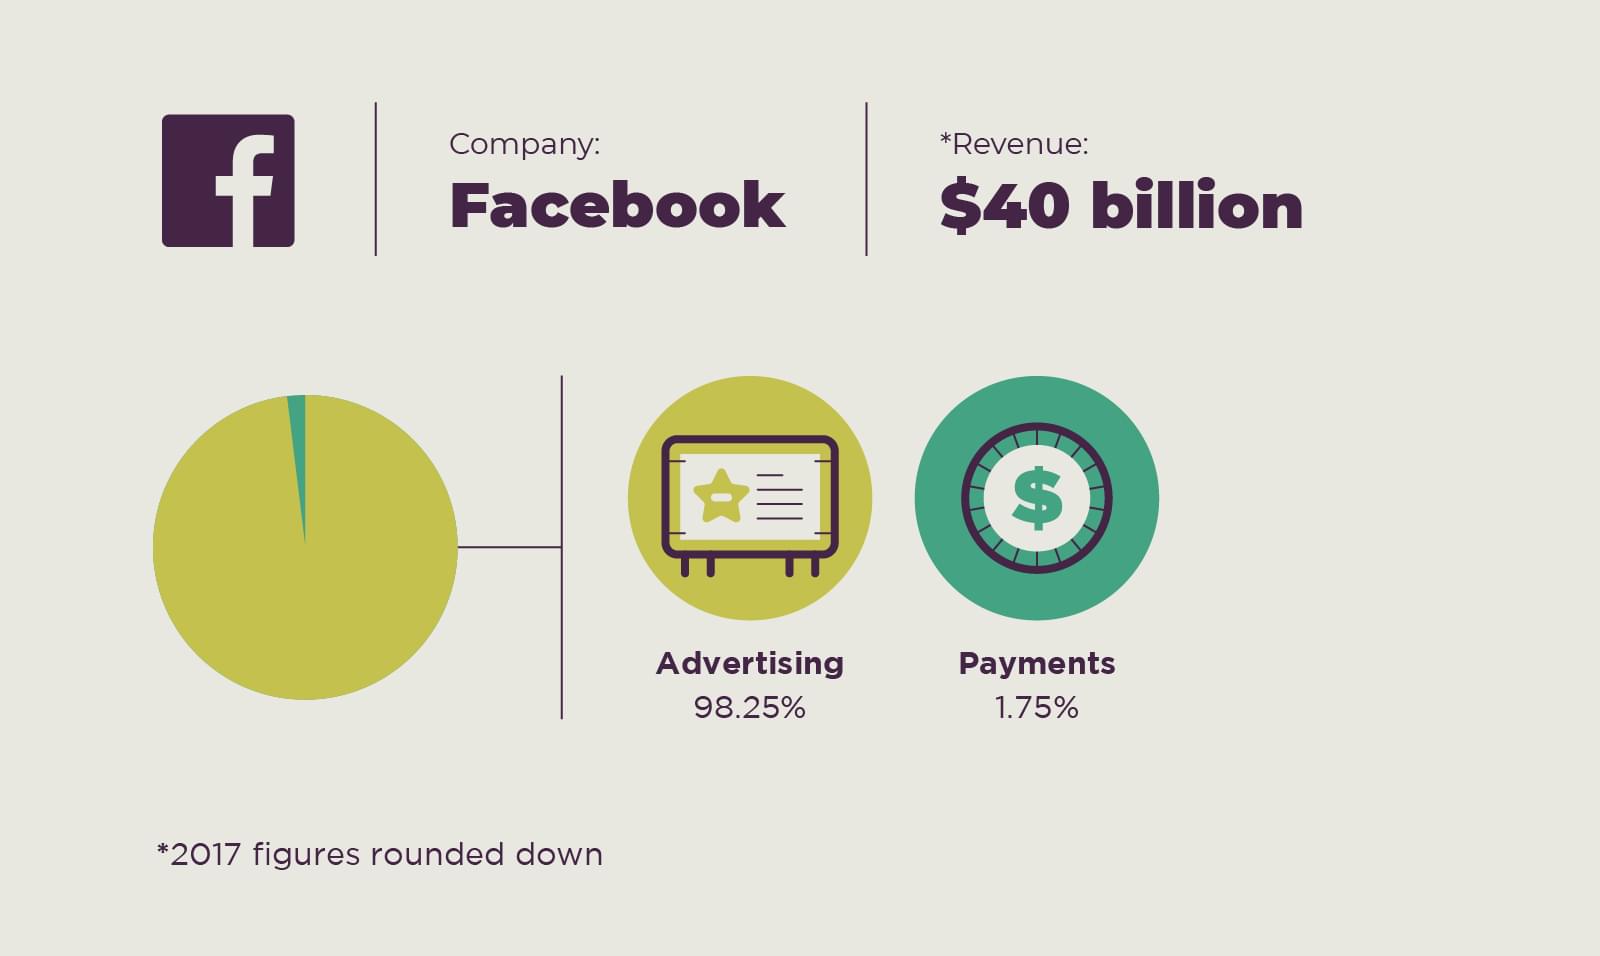 Facebook revenue dominated by advertising